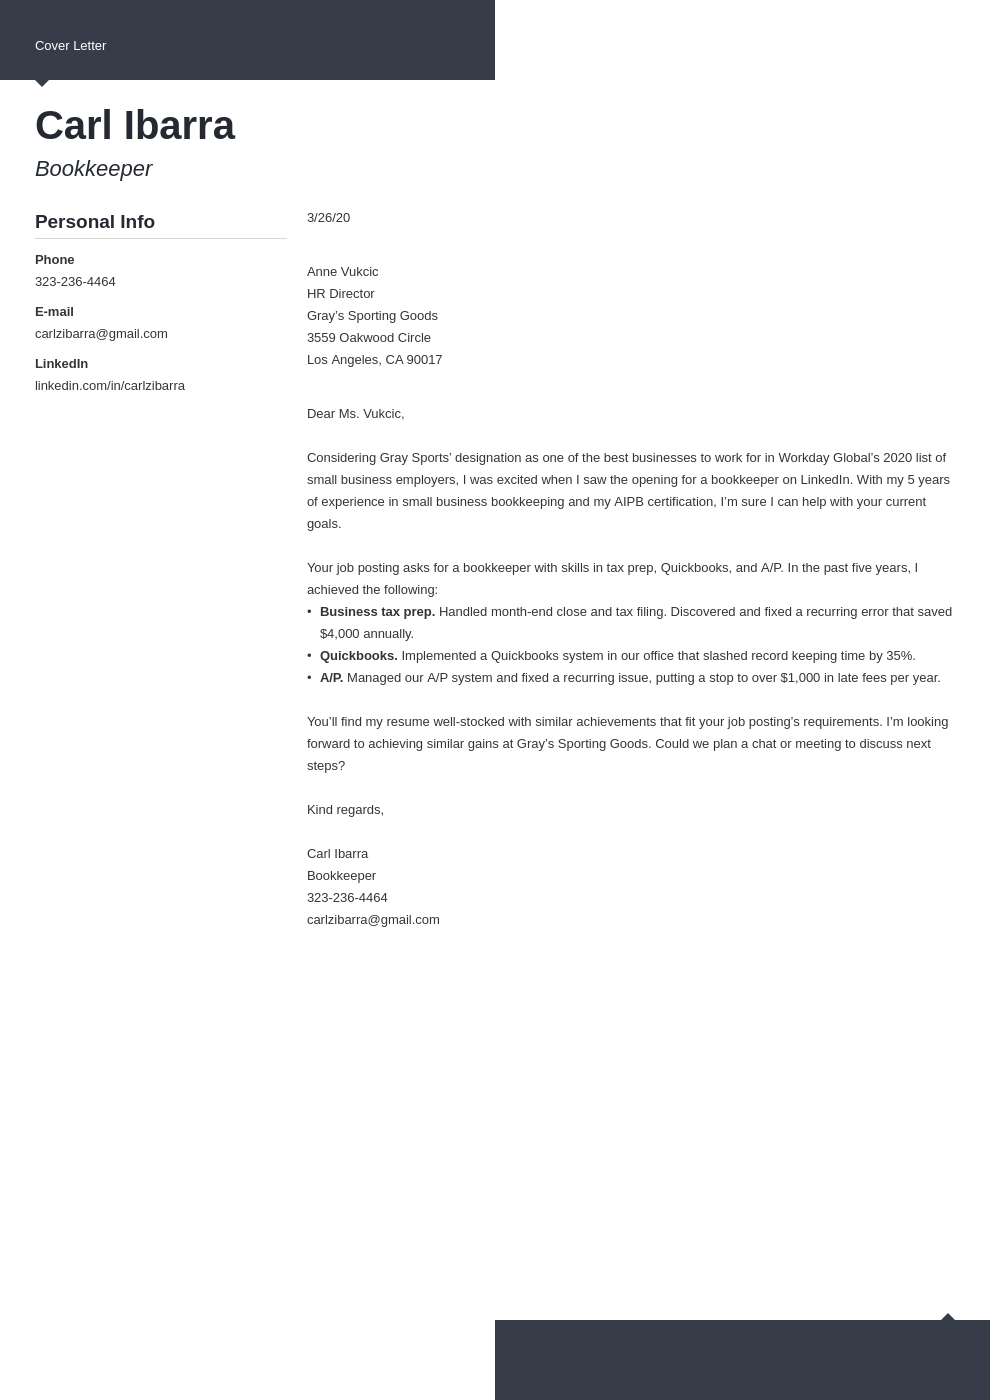 Bookkeeper Cover Letter: Sample, Format, & Writing Guide